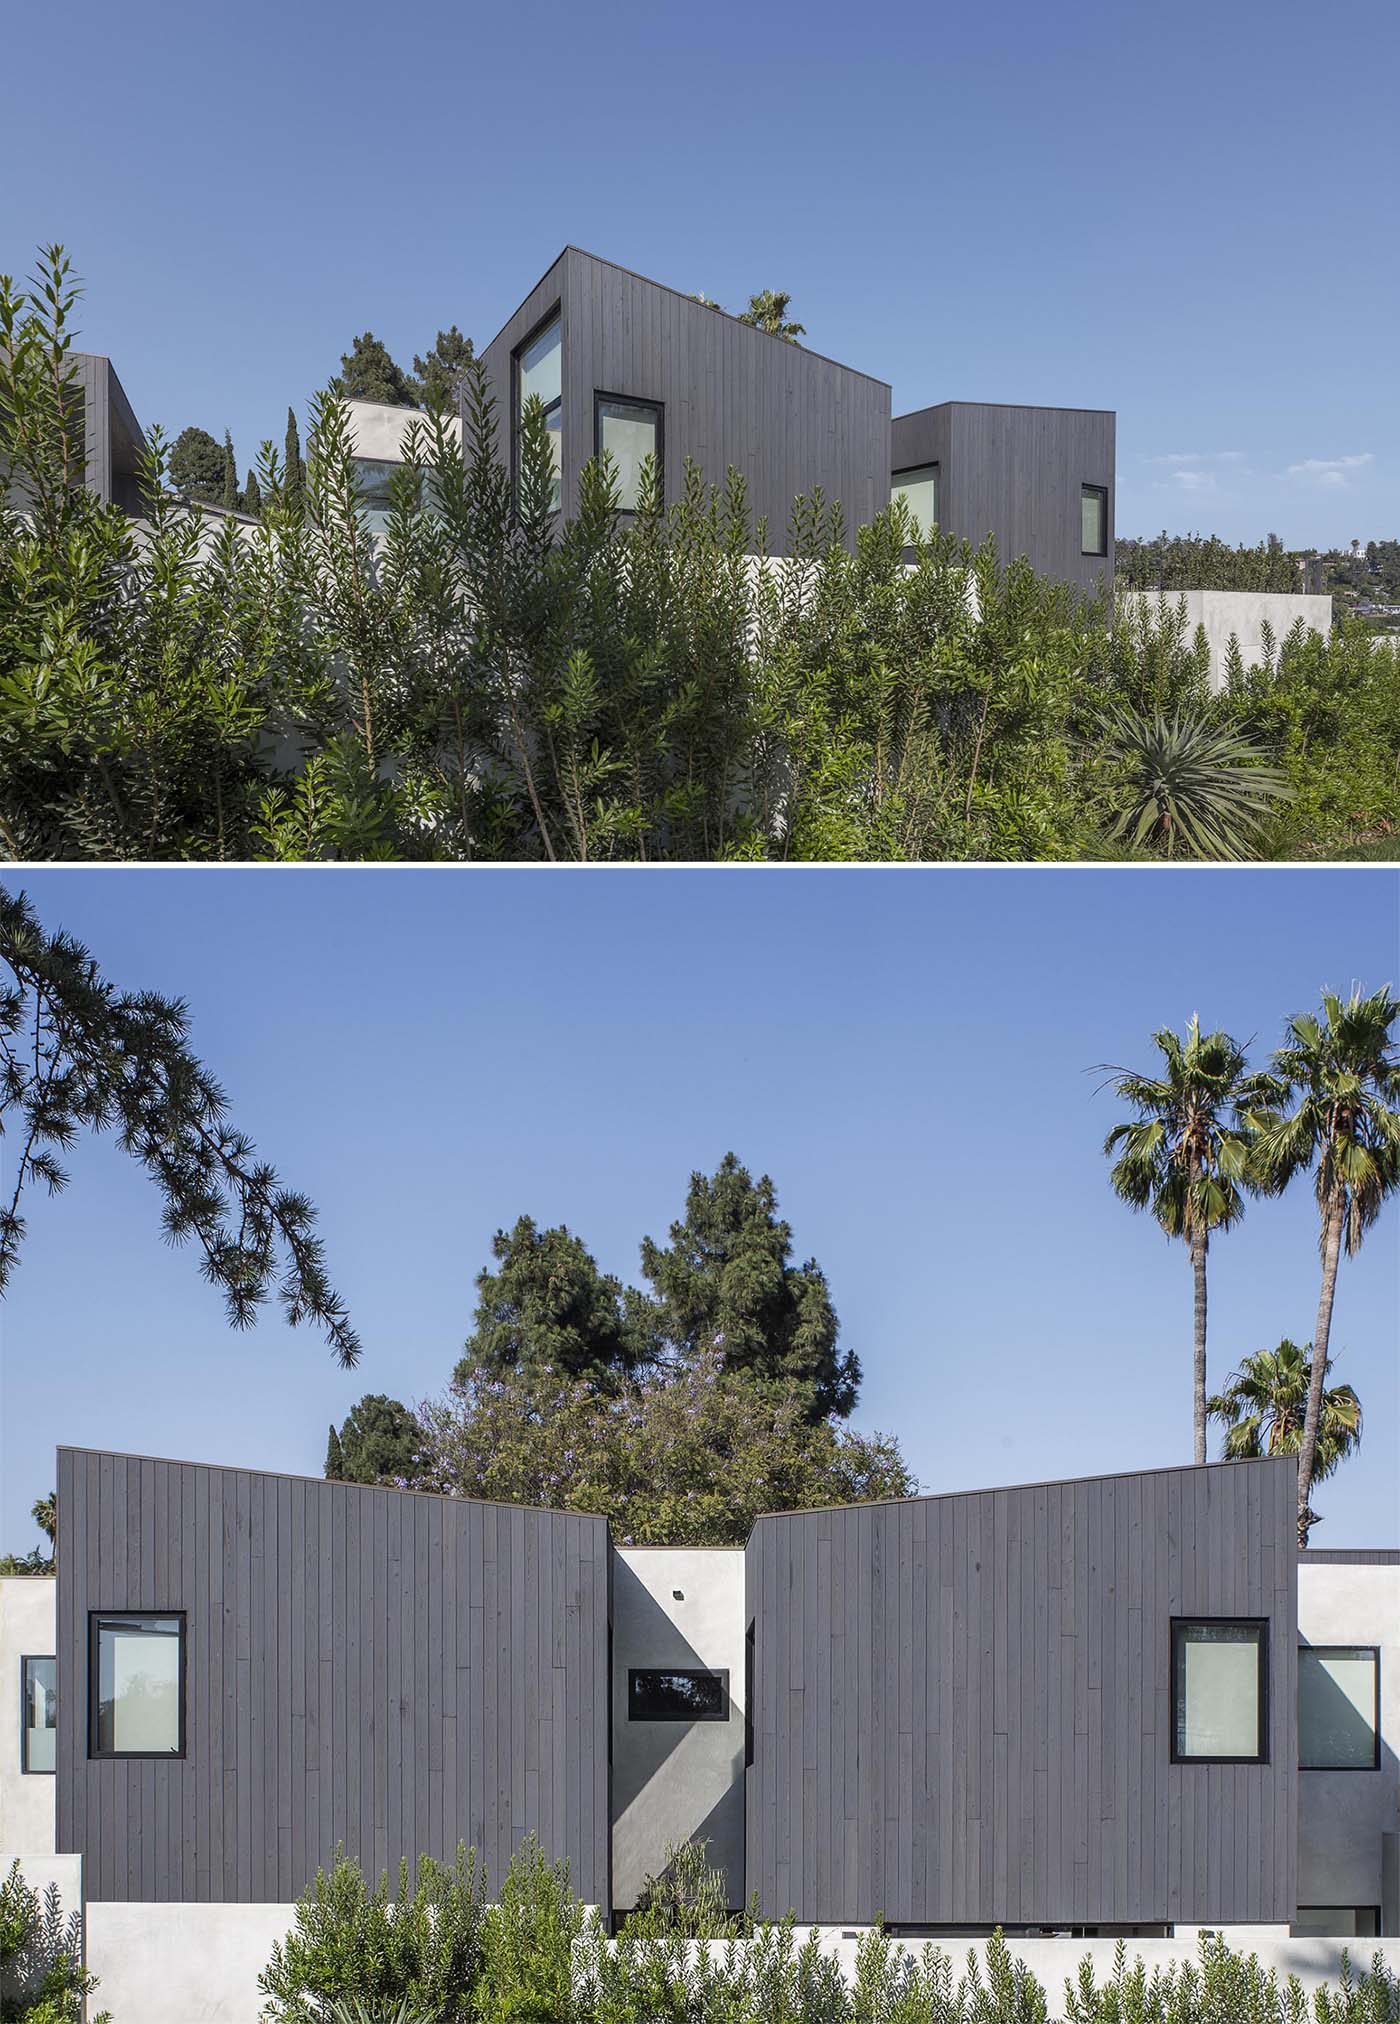 Situated on a highly exposed corner lot, the exterior of this modern home features Shou Sugi Ban charred cypress wood and a smooth exterior plaster.